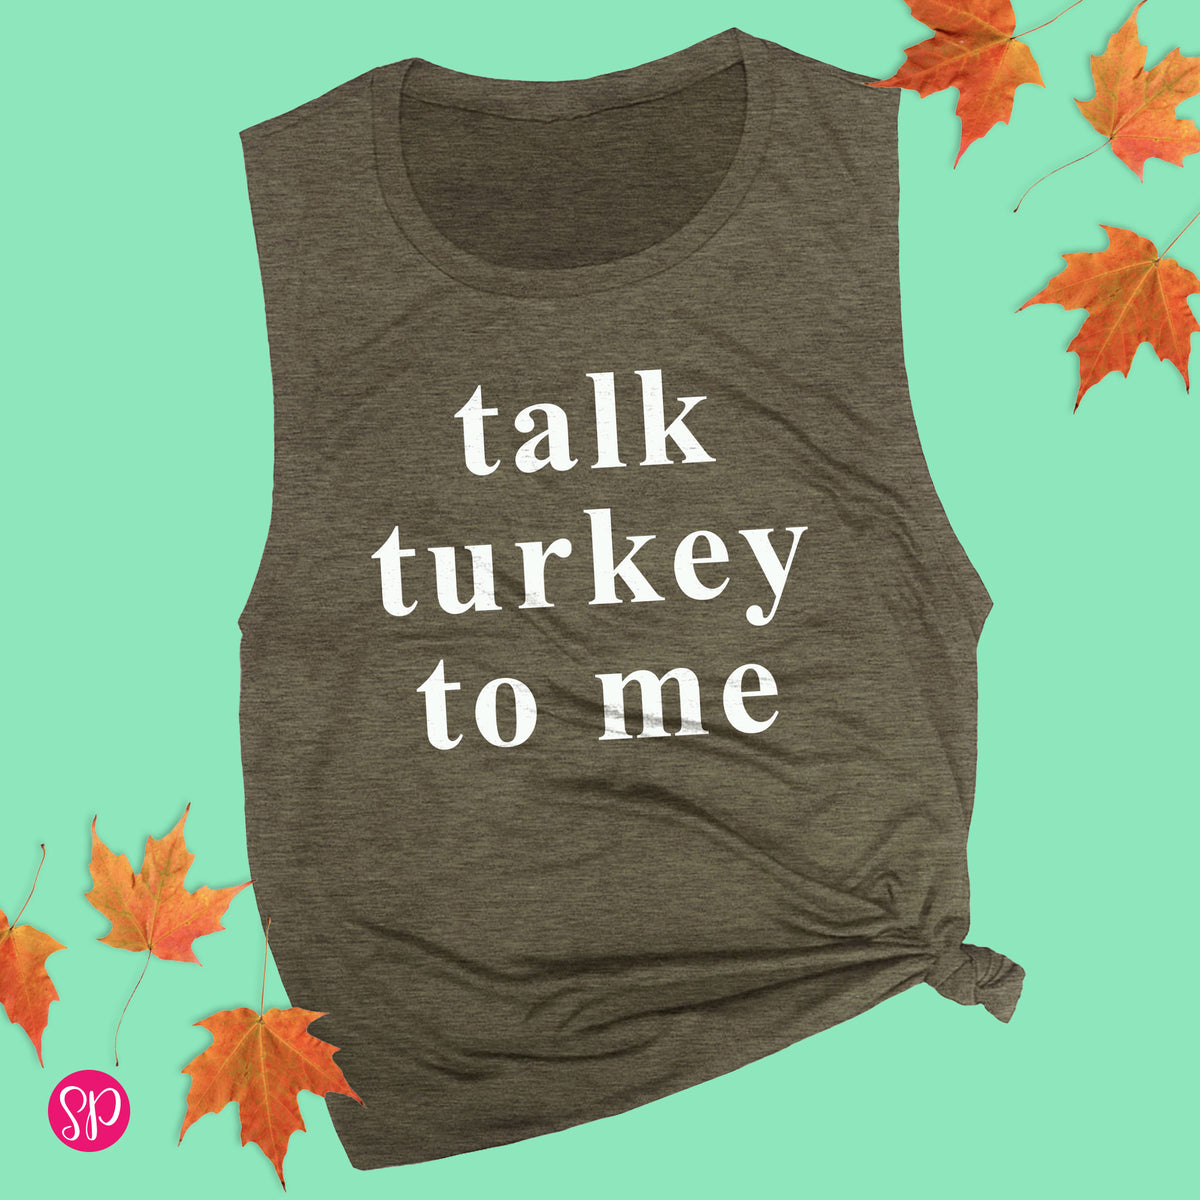 Talk Turkey To Me Thanksgiving Funny Fitness Running Workout Trot Graphic Tee Shirt Tank Top